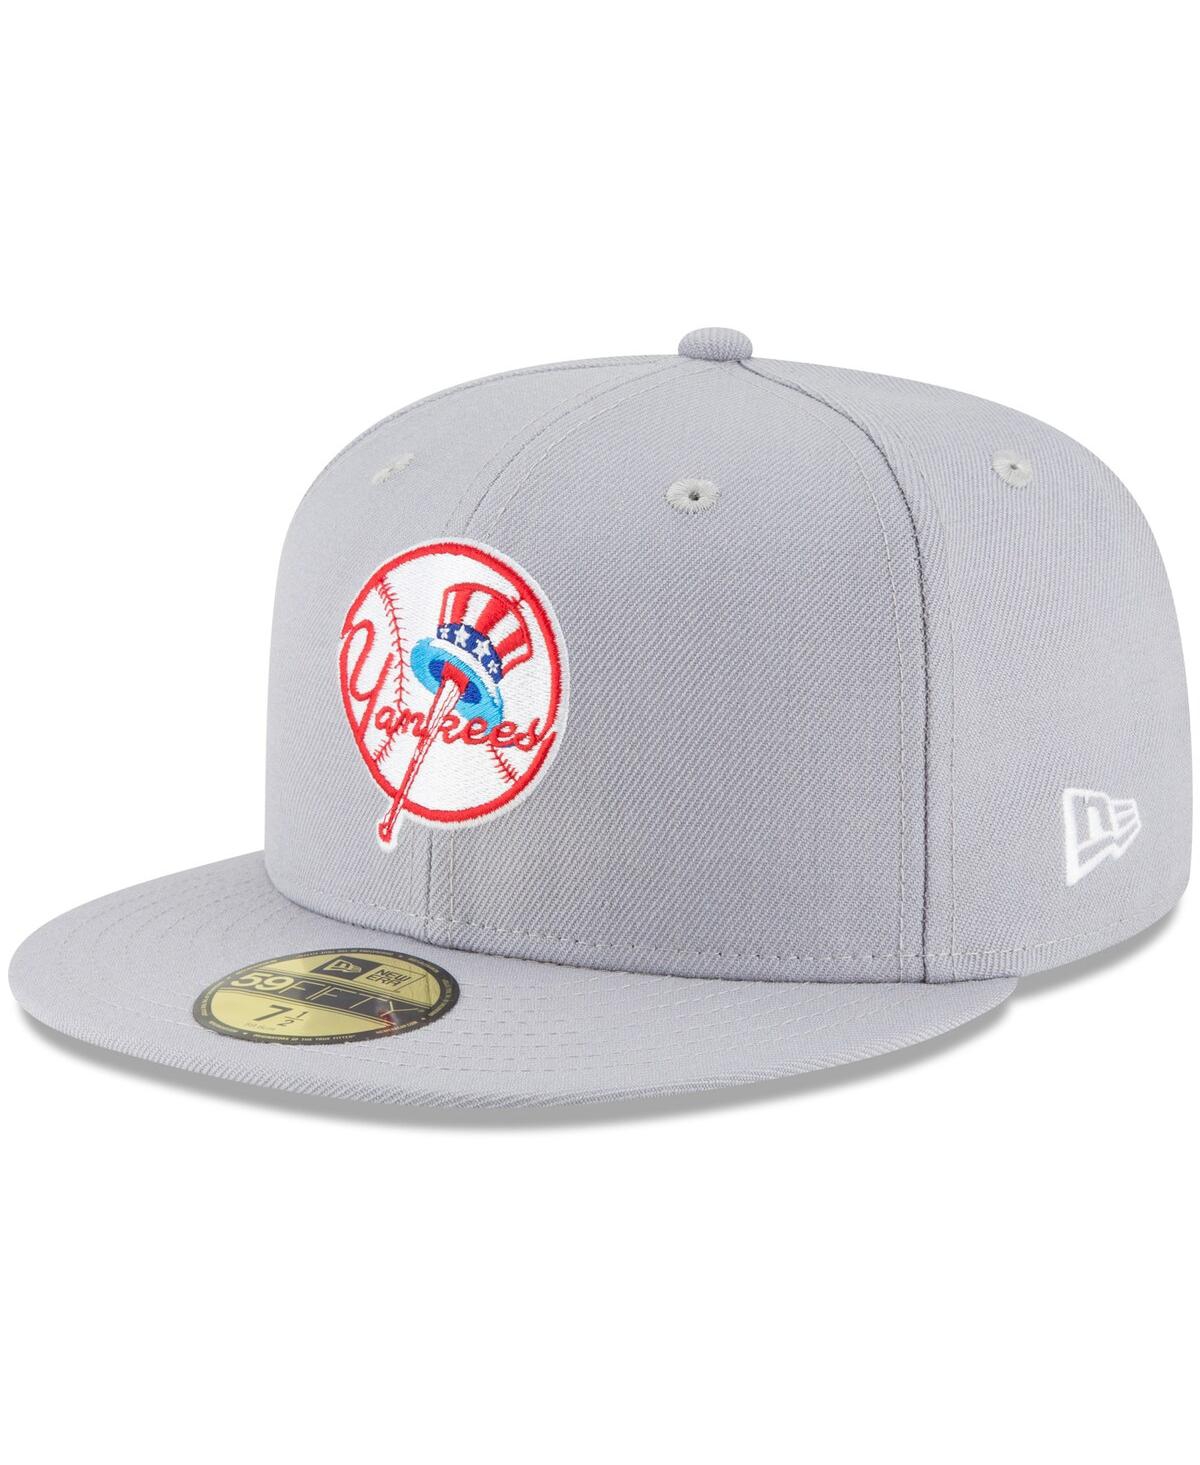 NEW ERA MEN'S NEW ERA GRAY NEW YORK YANKEES COOPERSTOWN COLLECTION WOOL 59FIFTY FITTED HAT